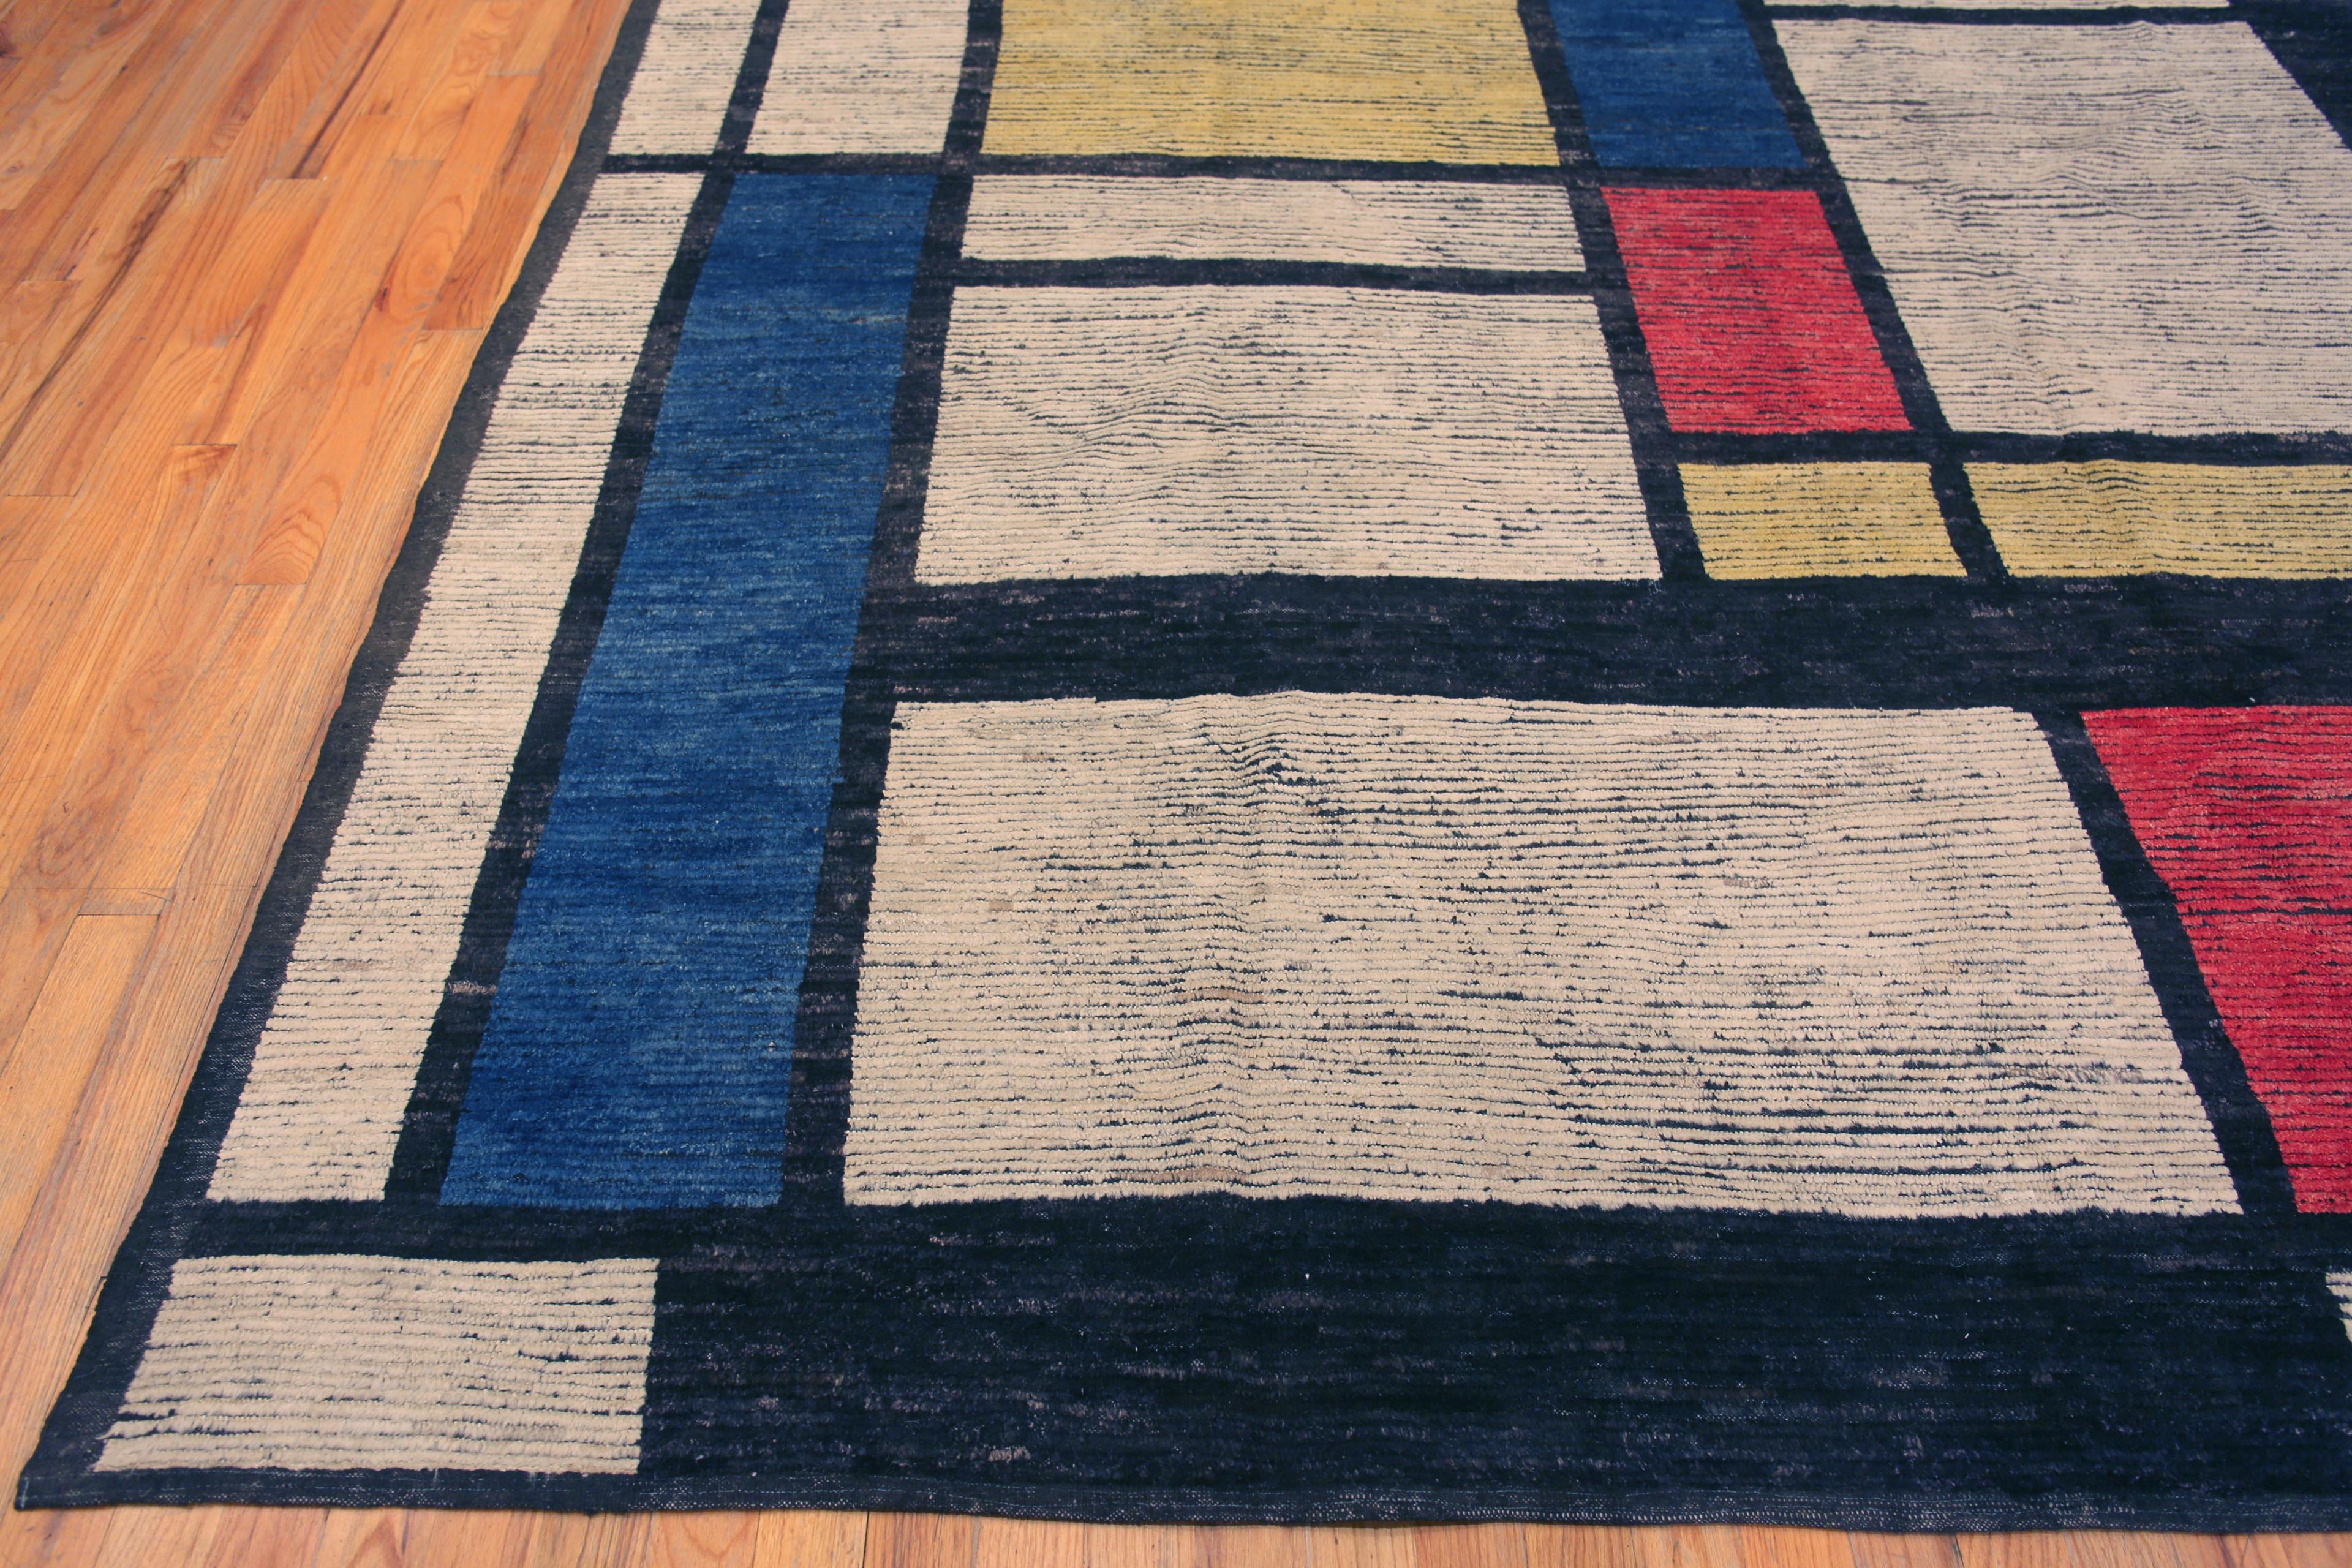 Central Asian Nazmiyal Collection Contemporary Artistic Piet Mondrian Modern Rug 10'8